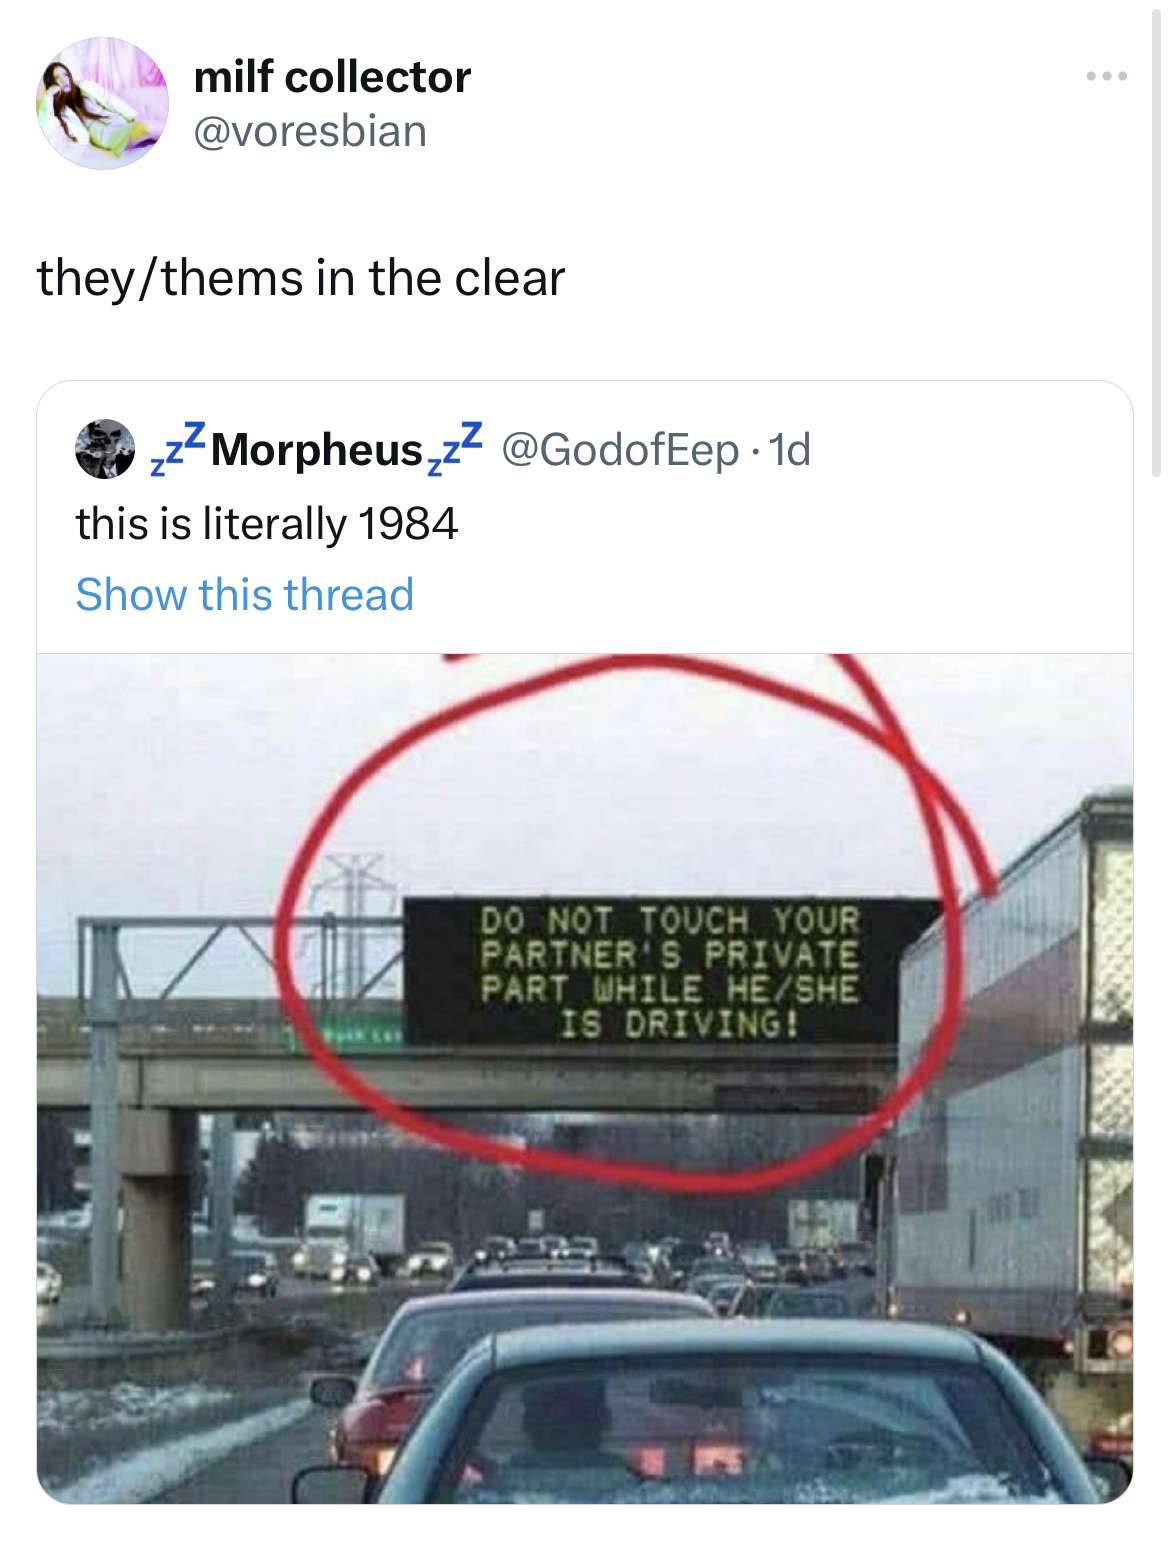 savage tweets - brighton beach - milf collector theythems in the clear zMorpheus,zz this is literally 1984 Show this thread Do Not Touch Your Partner'S Private Part While HeShe Is Driving!